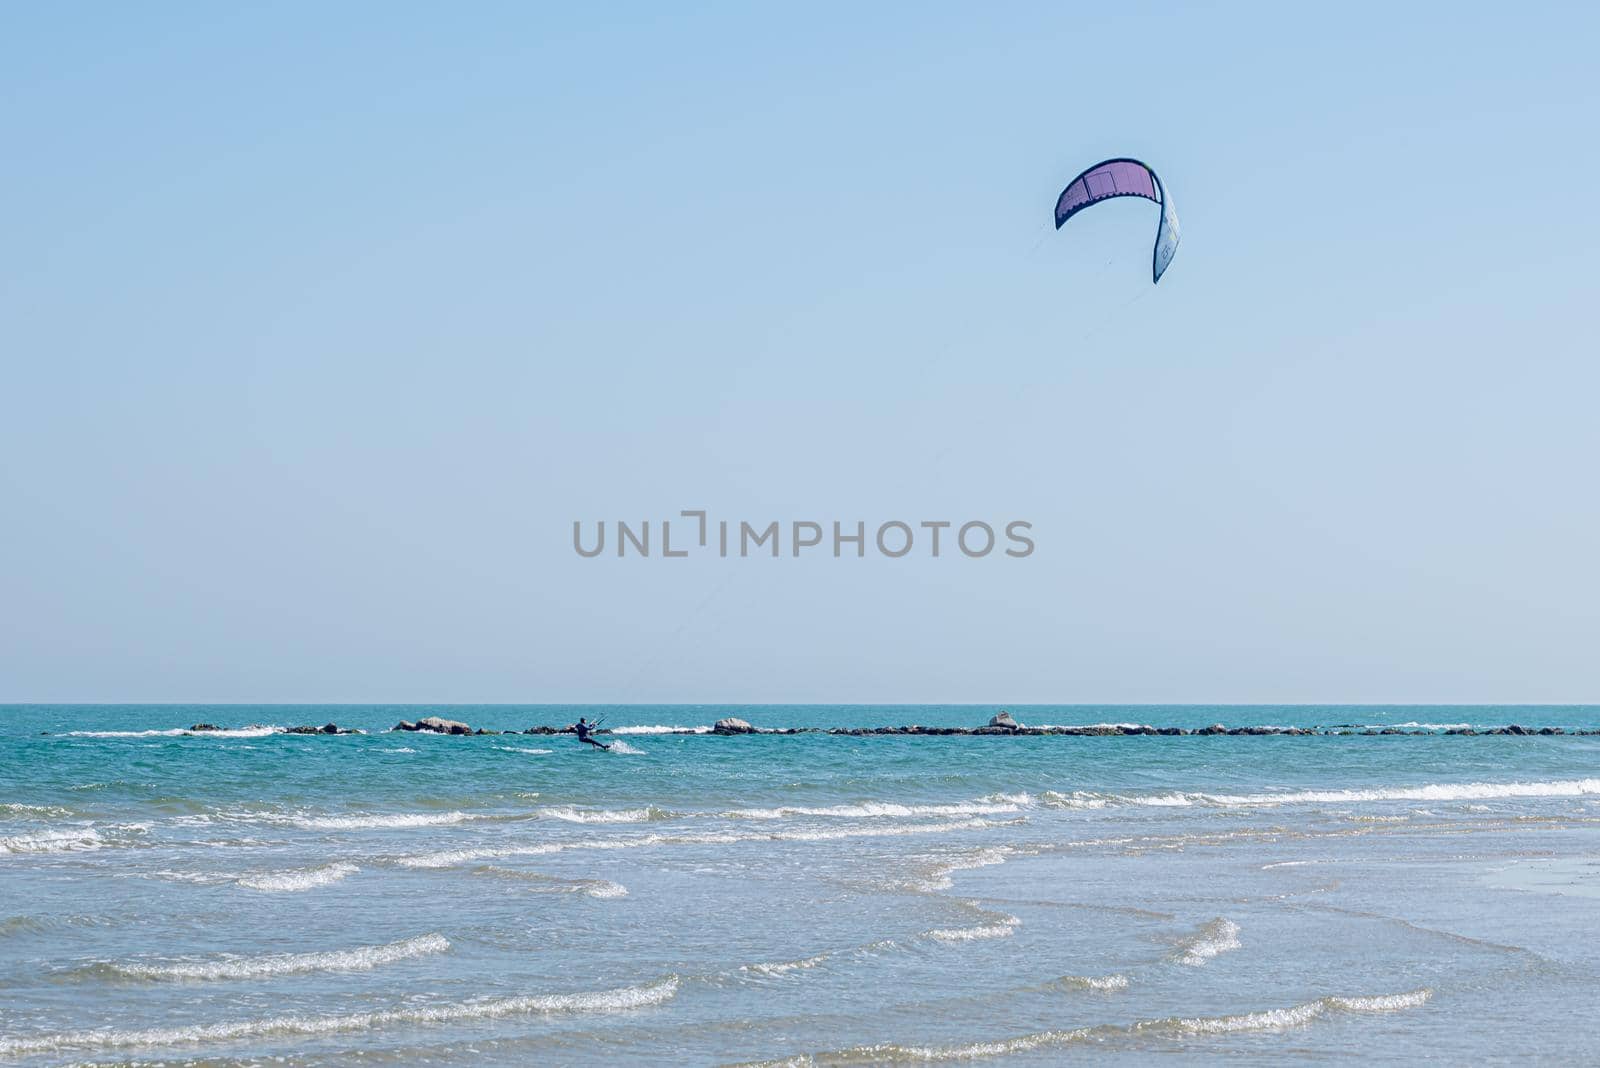 Kite surfing in Pesaro, Marche region of Italy, on the Adriatic sea during a sunny and windy summer day